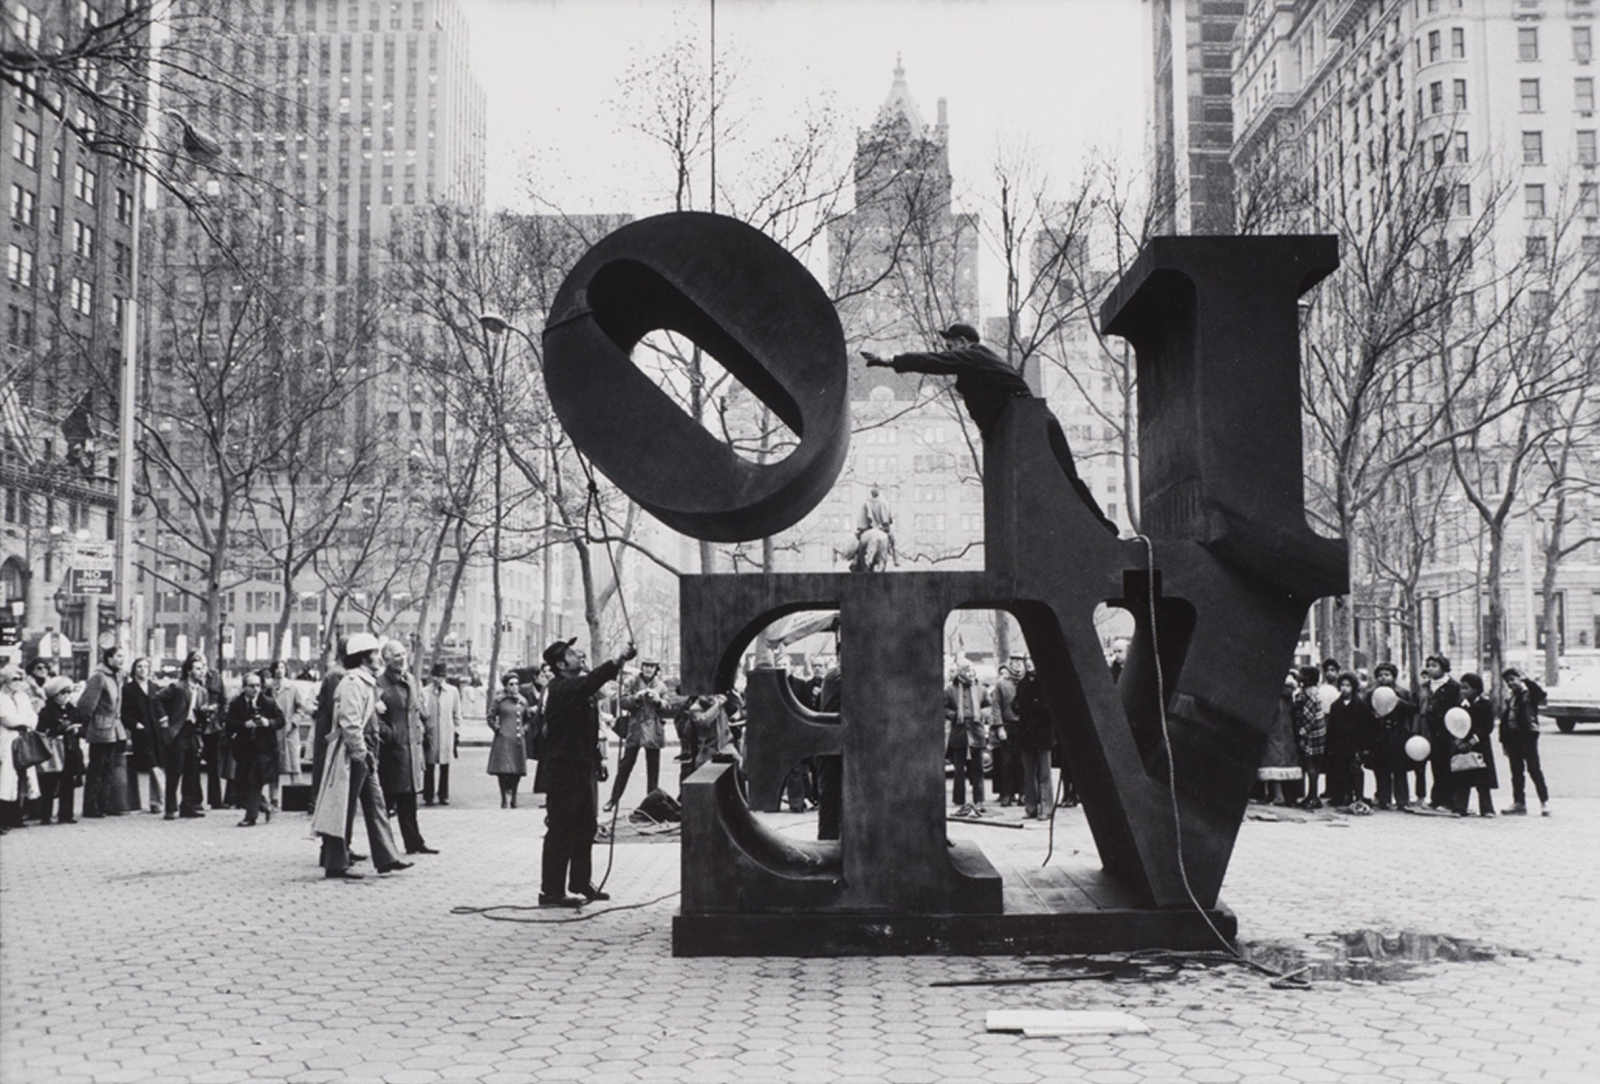 Installation of Indiana&amp;#39;s LOVE (1966) at Fifth Avenue and 60th Street, New York, November 1971 . Photo: Eliot Elisofon. Eliot Elisofon Papers and Photography Collection, 1930-1988, undated [bulk 1942-1973]. The University of Texas at Austin, Harry Ransom Center